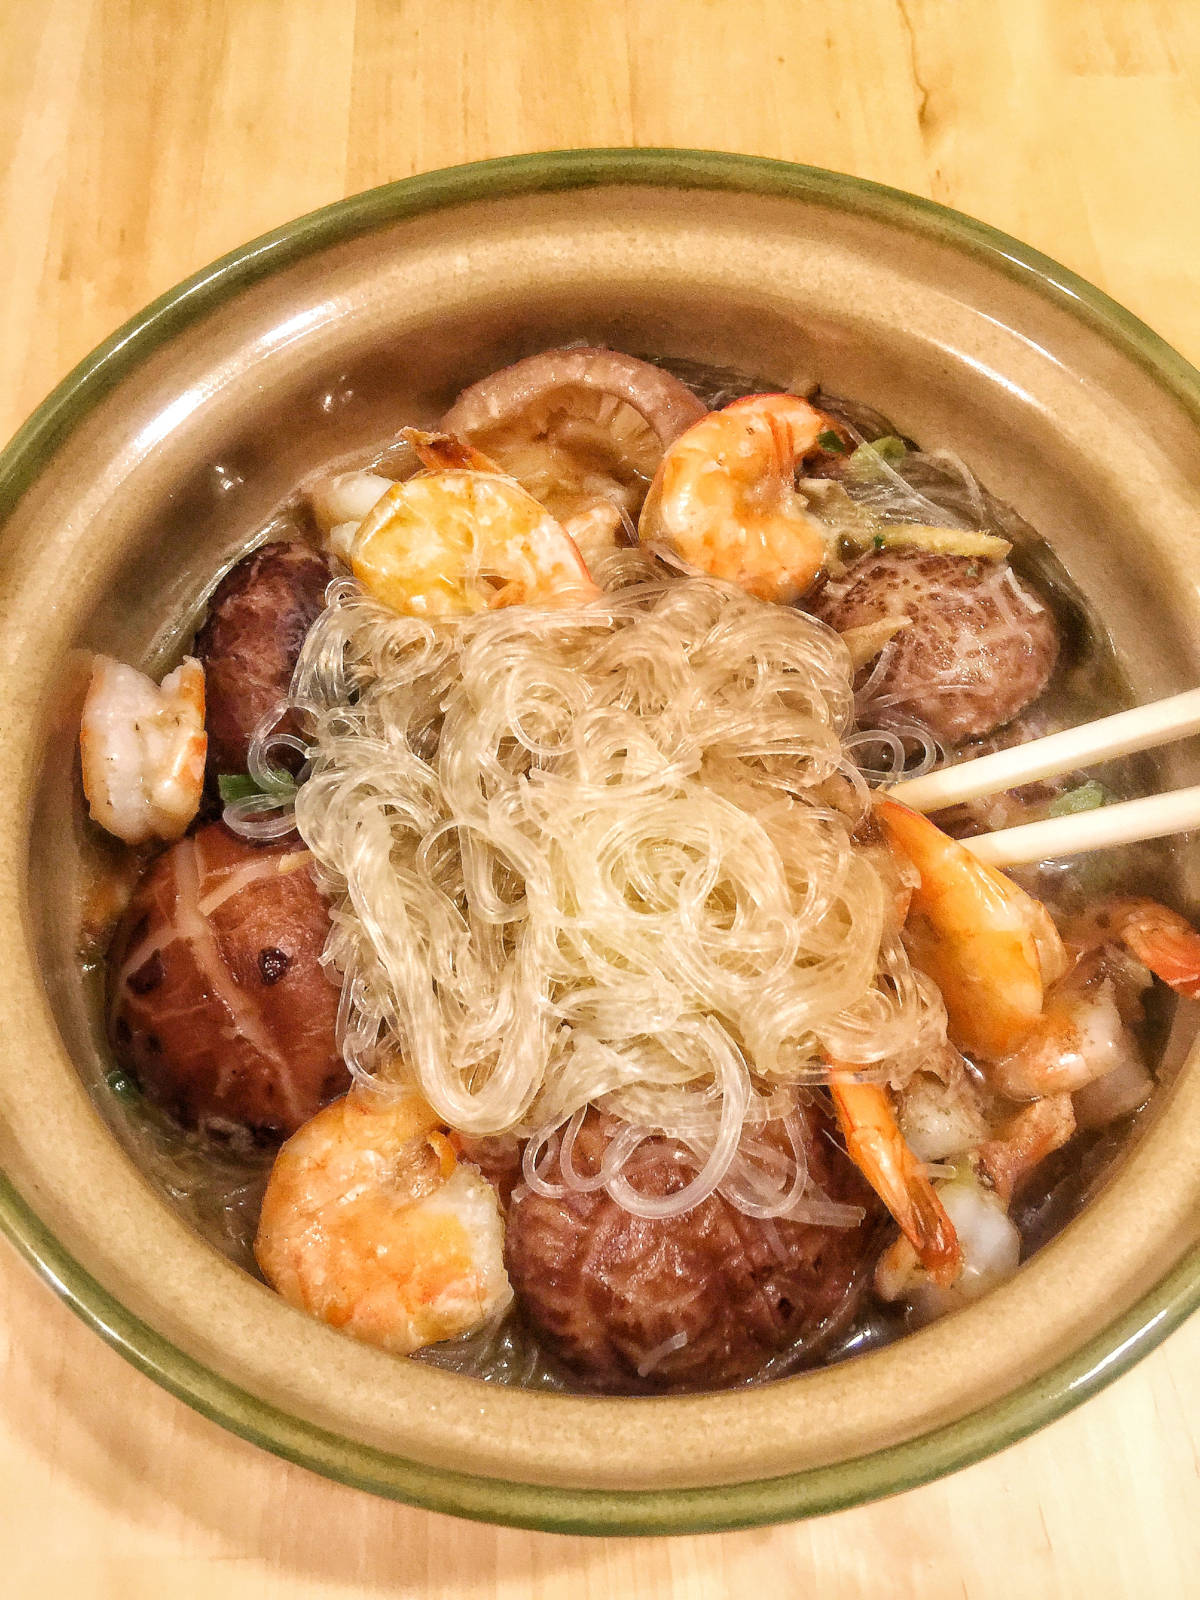 Cooked vermicelli noodles, shelled shrimps and shiitake mushrooms in a clay pot with a pair of chopsticks stick to the pot